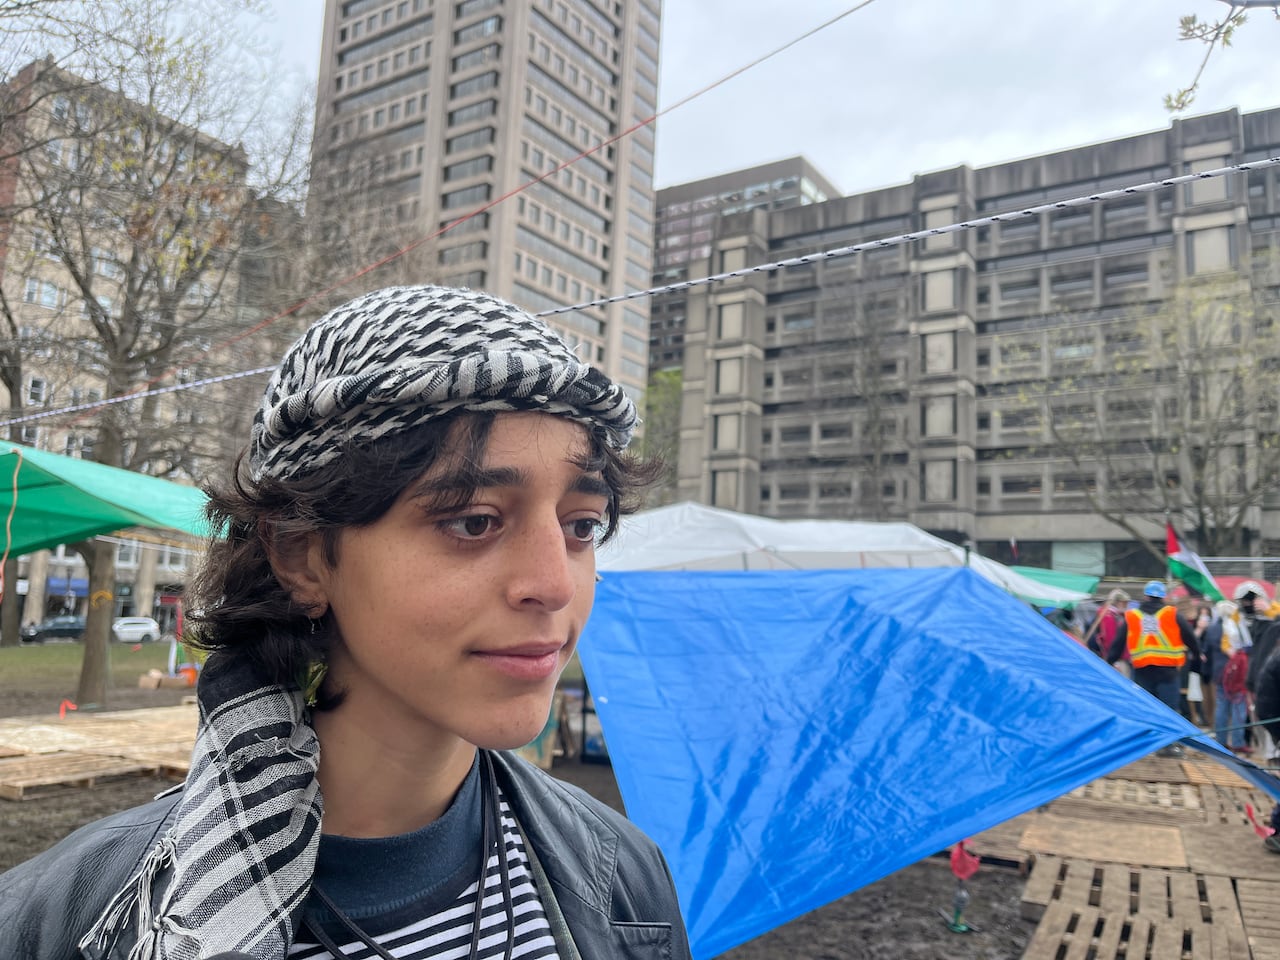 student protesters at mcgill encampment determined to stay after judge rejects injunction